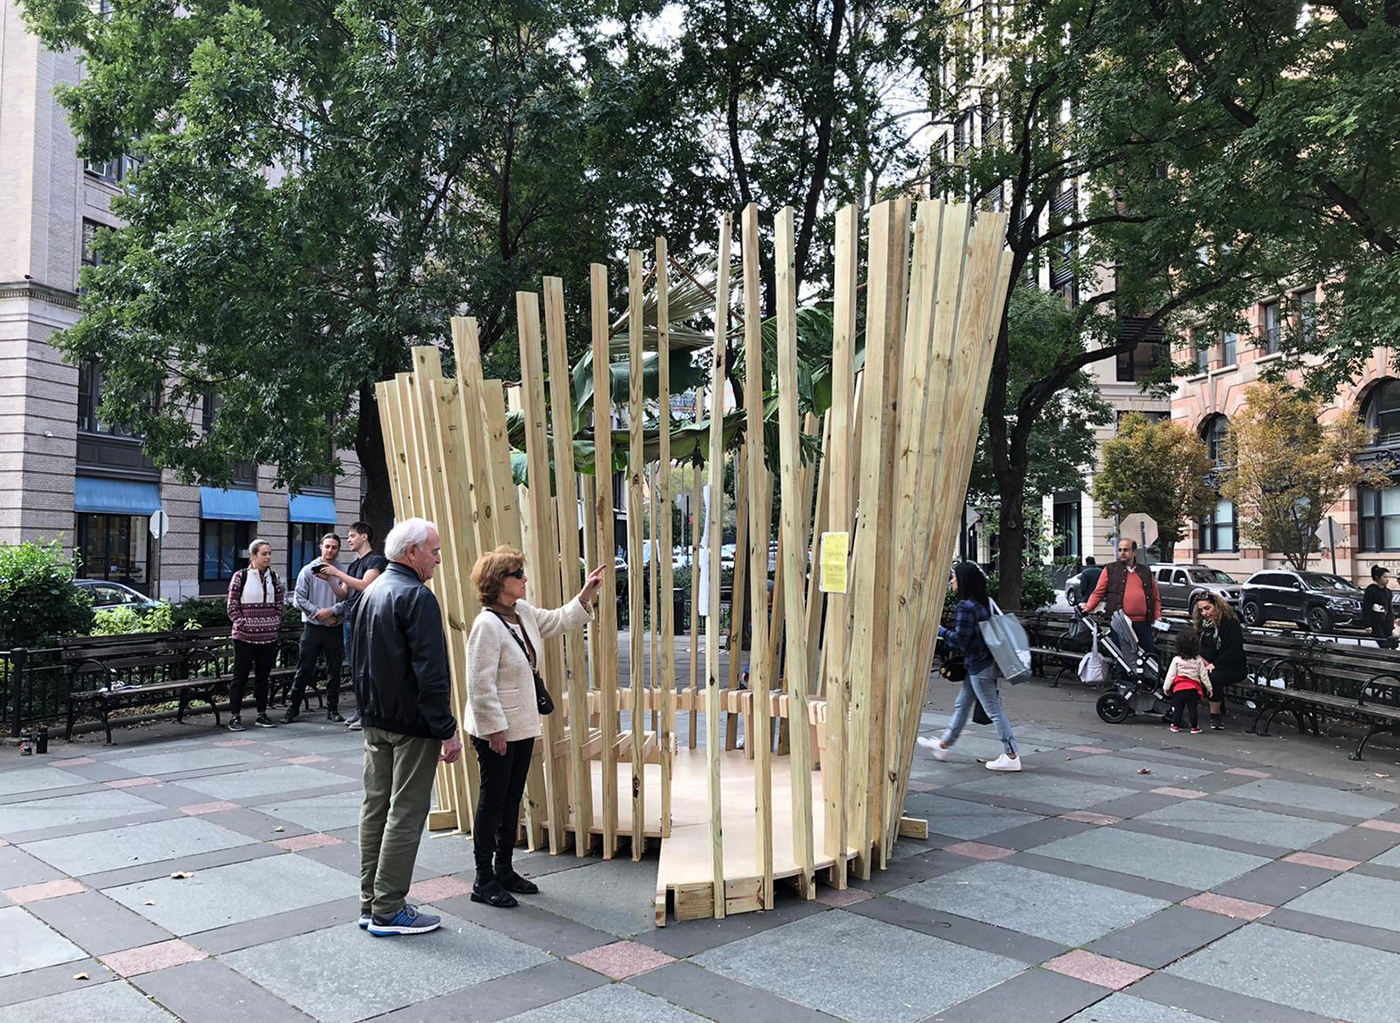 The sukkah designed by GAUD students in Tribeca Park